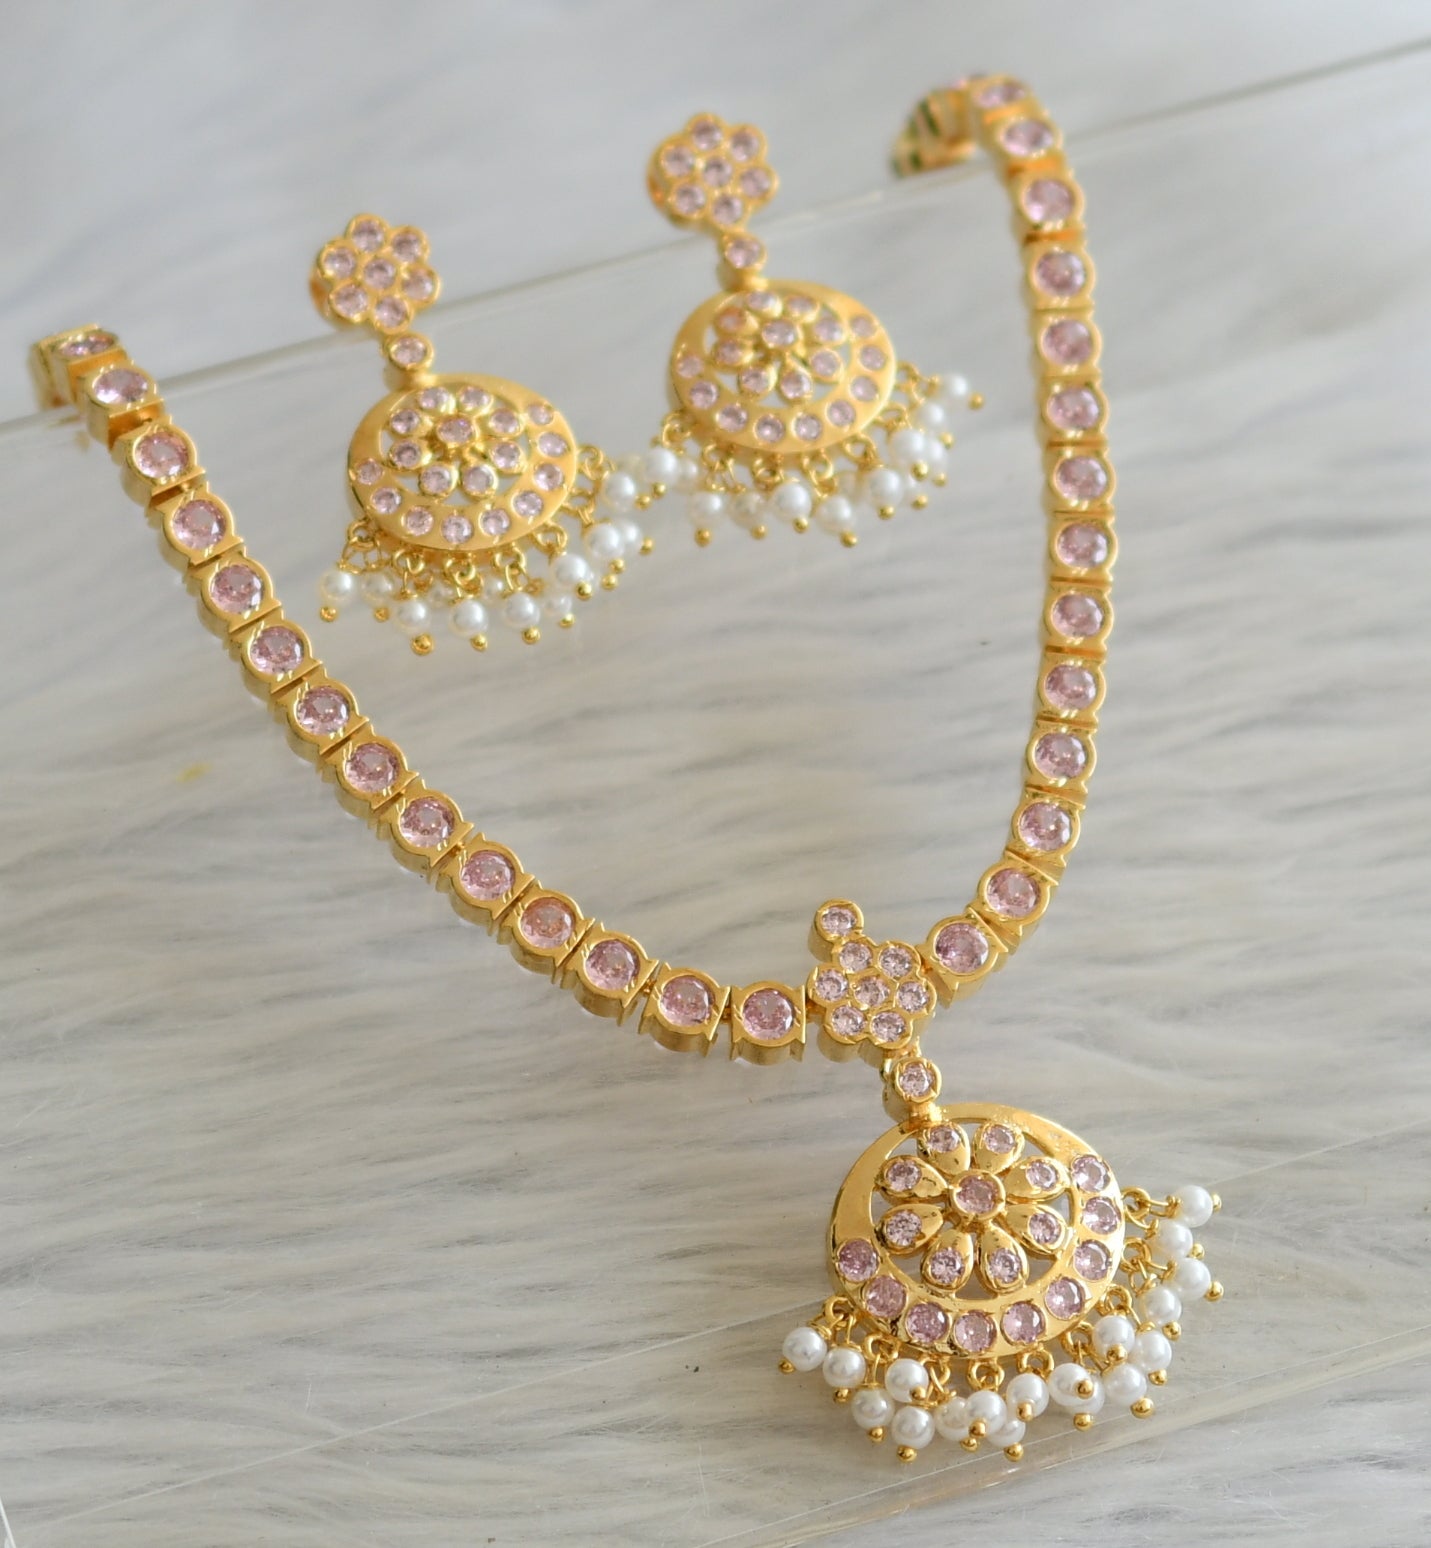 Gold tone ad baby pink south indian style attigai/necklace set dj-45884